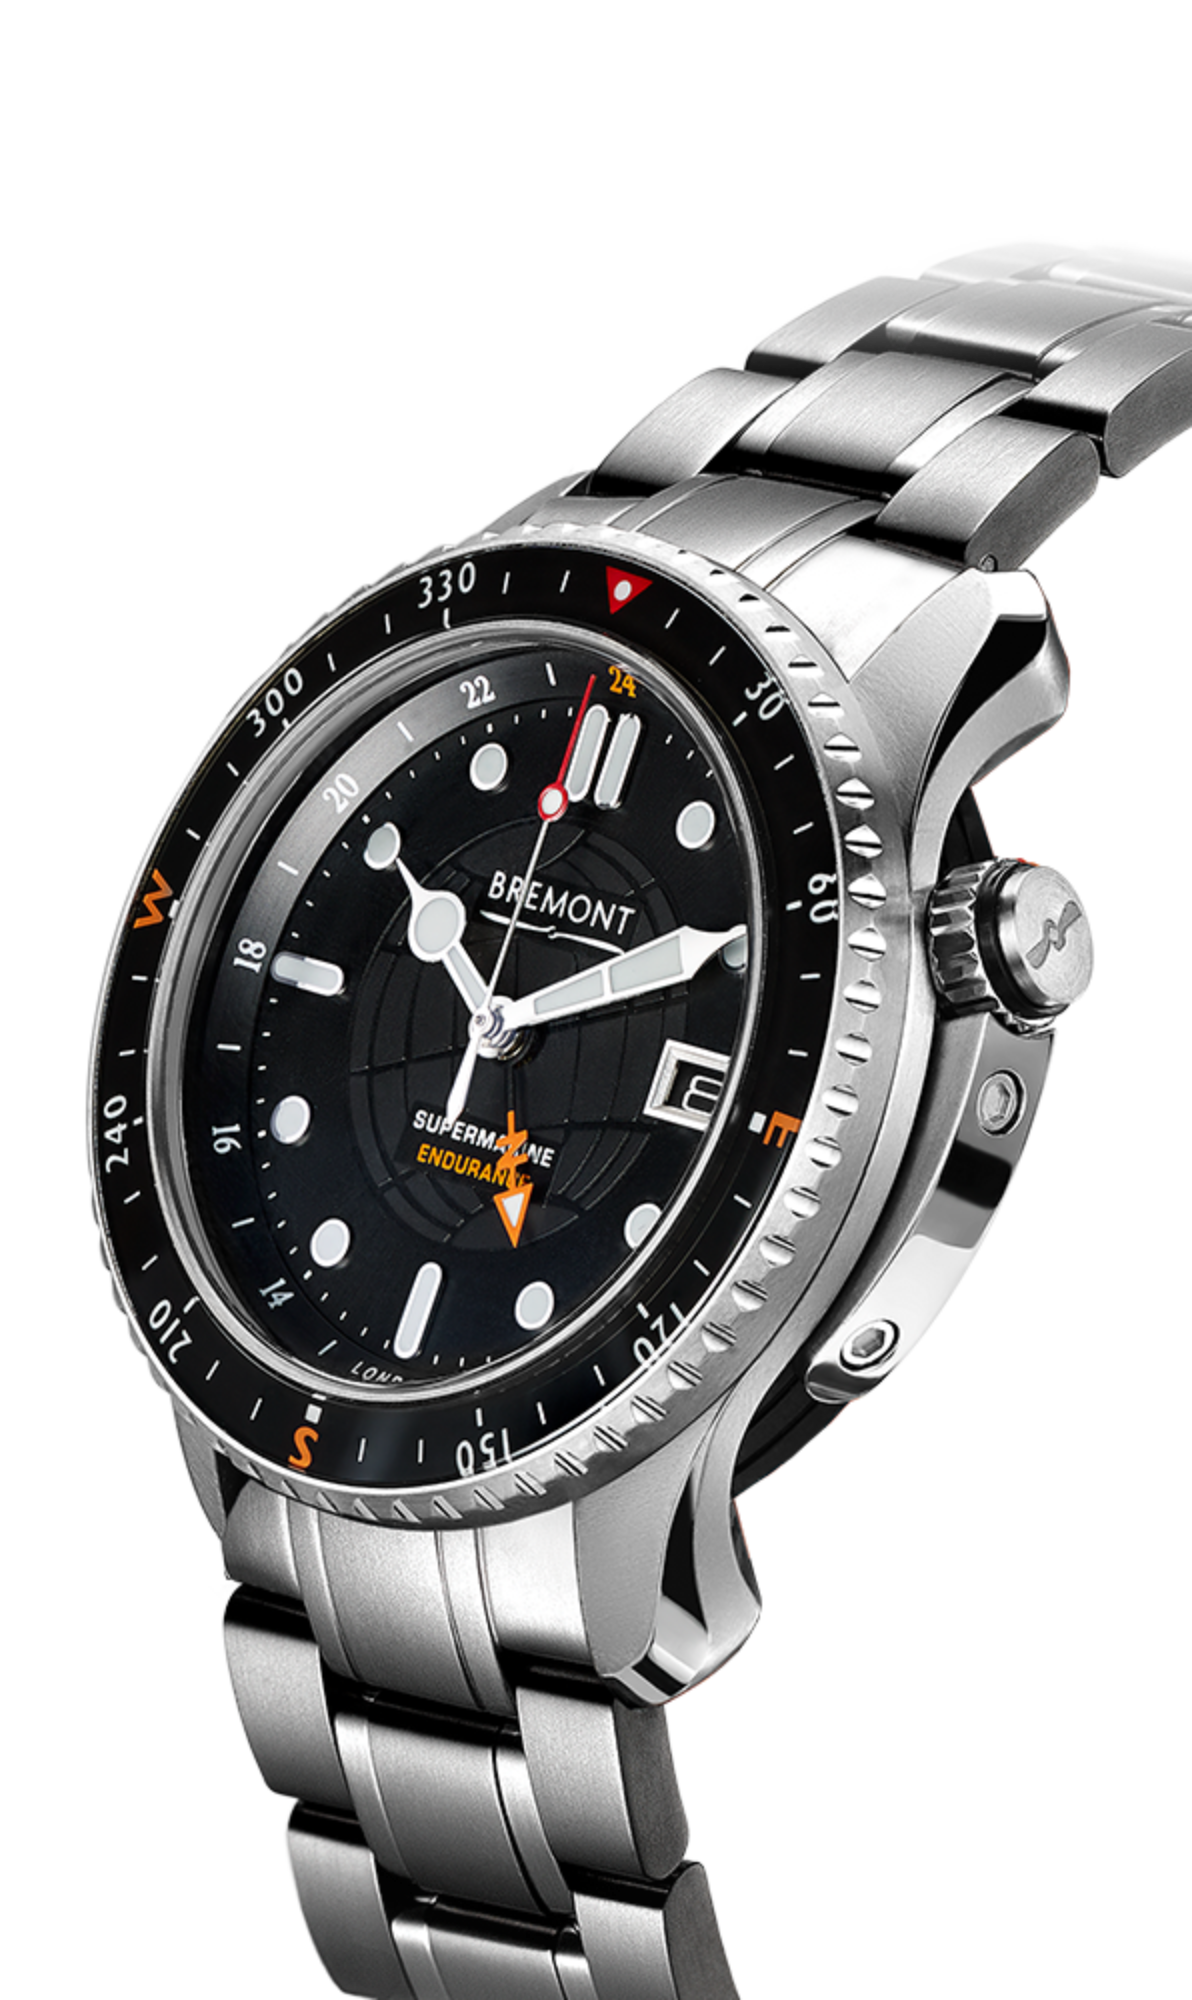 grit evne Tranquility Endurance Limited Edition Watch- Bremont Watch Company